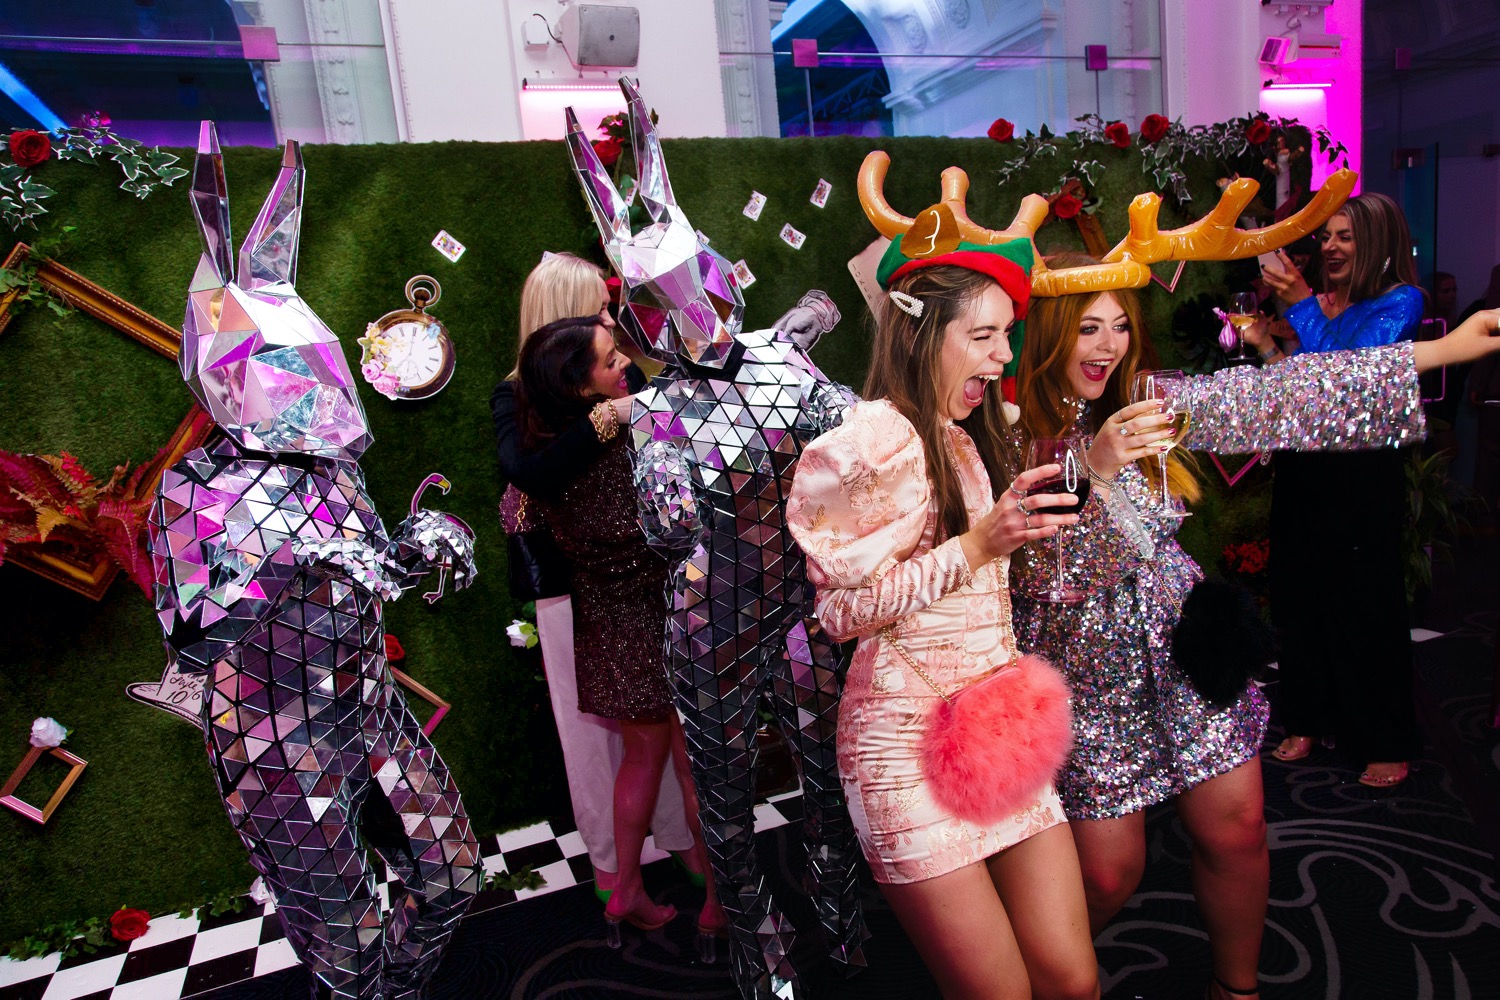 Corporate Event Organisers - Alice in wonderland themed corporate event